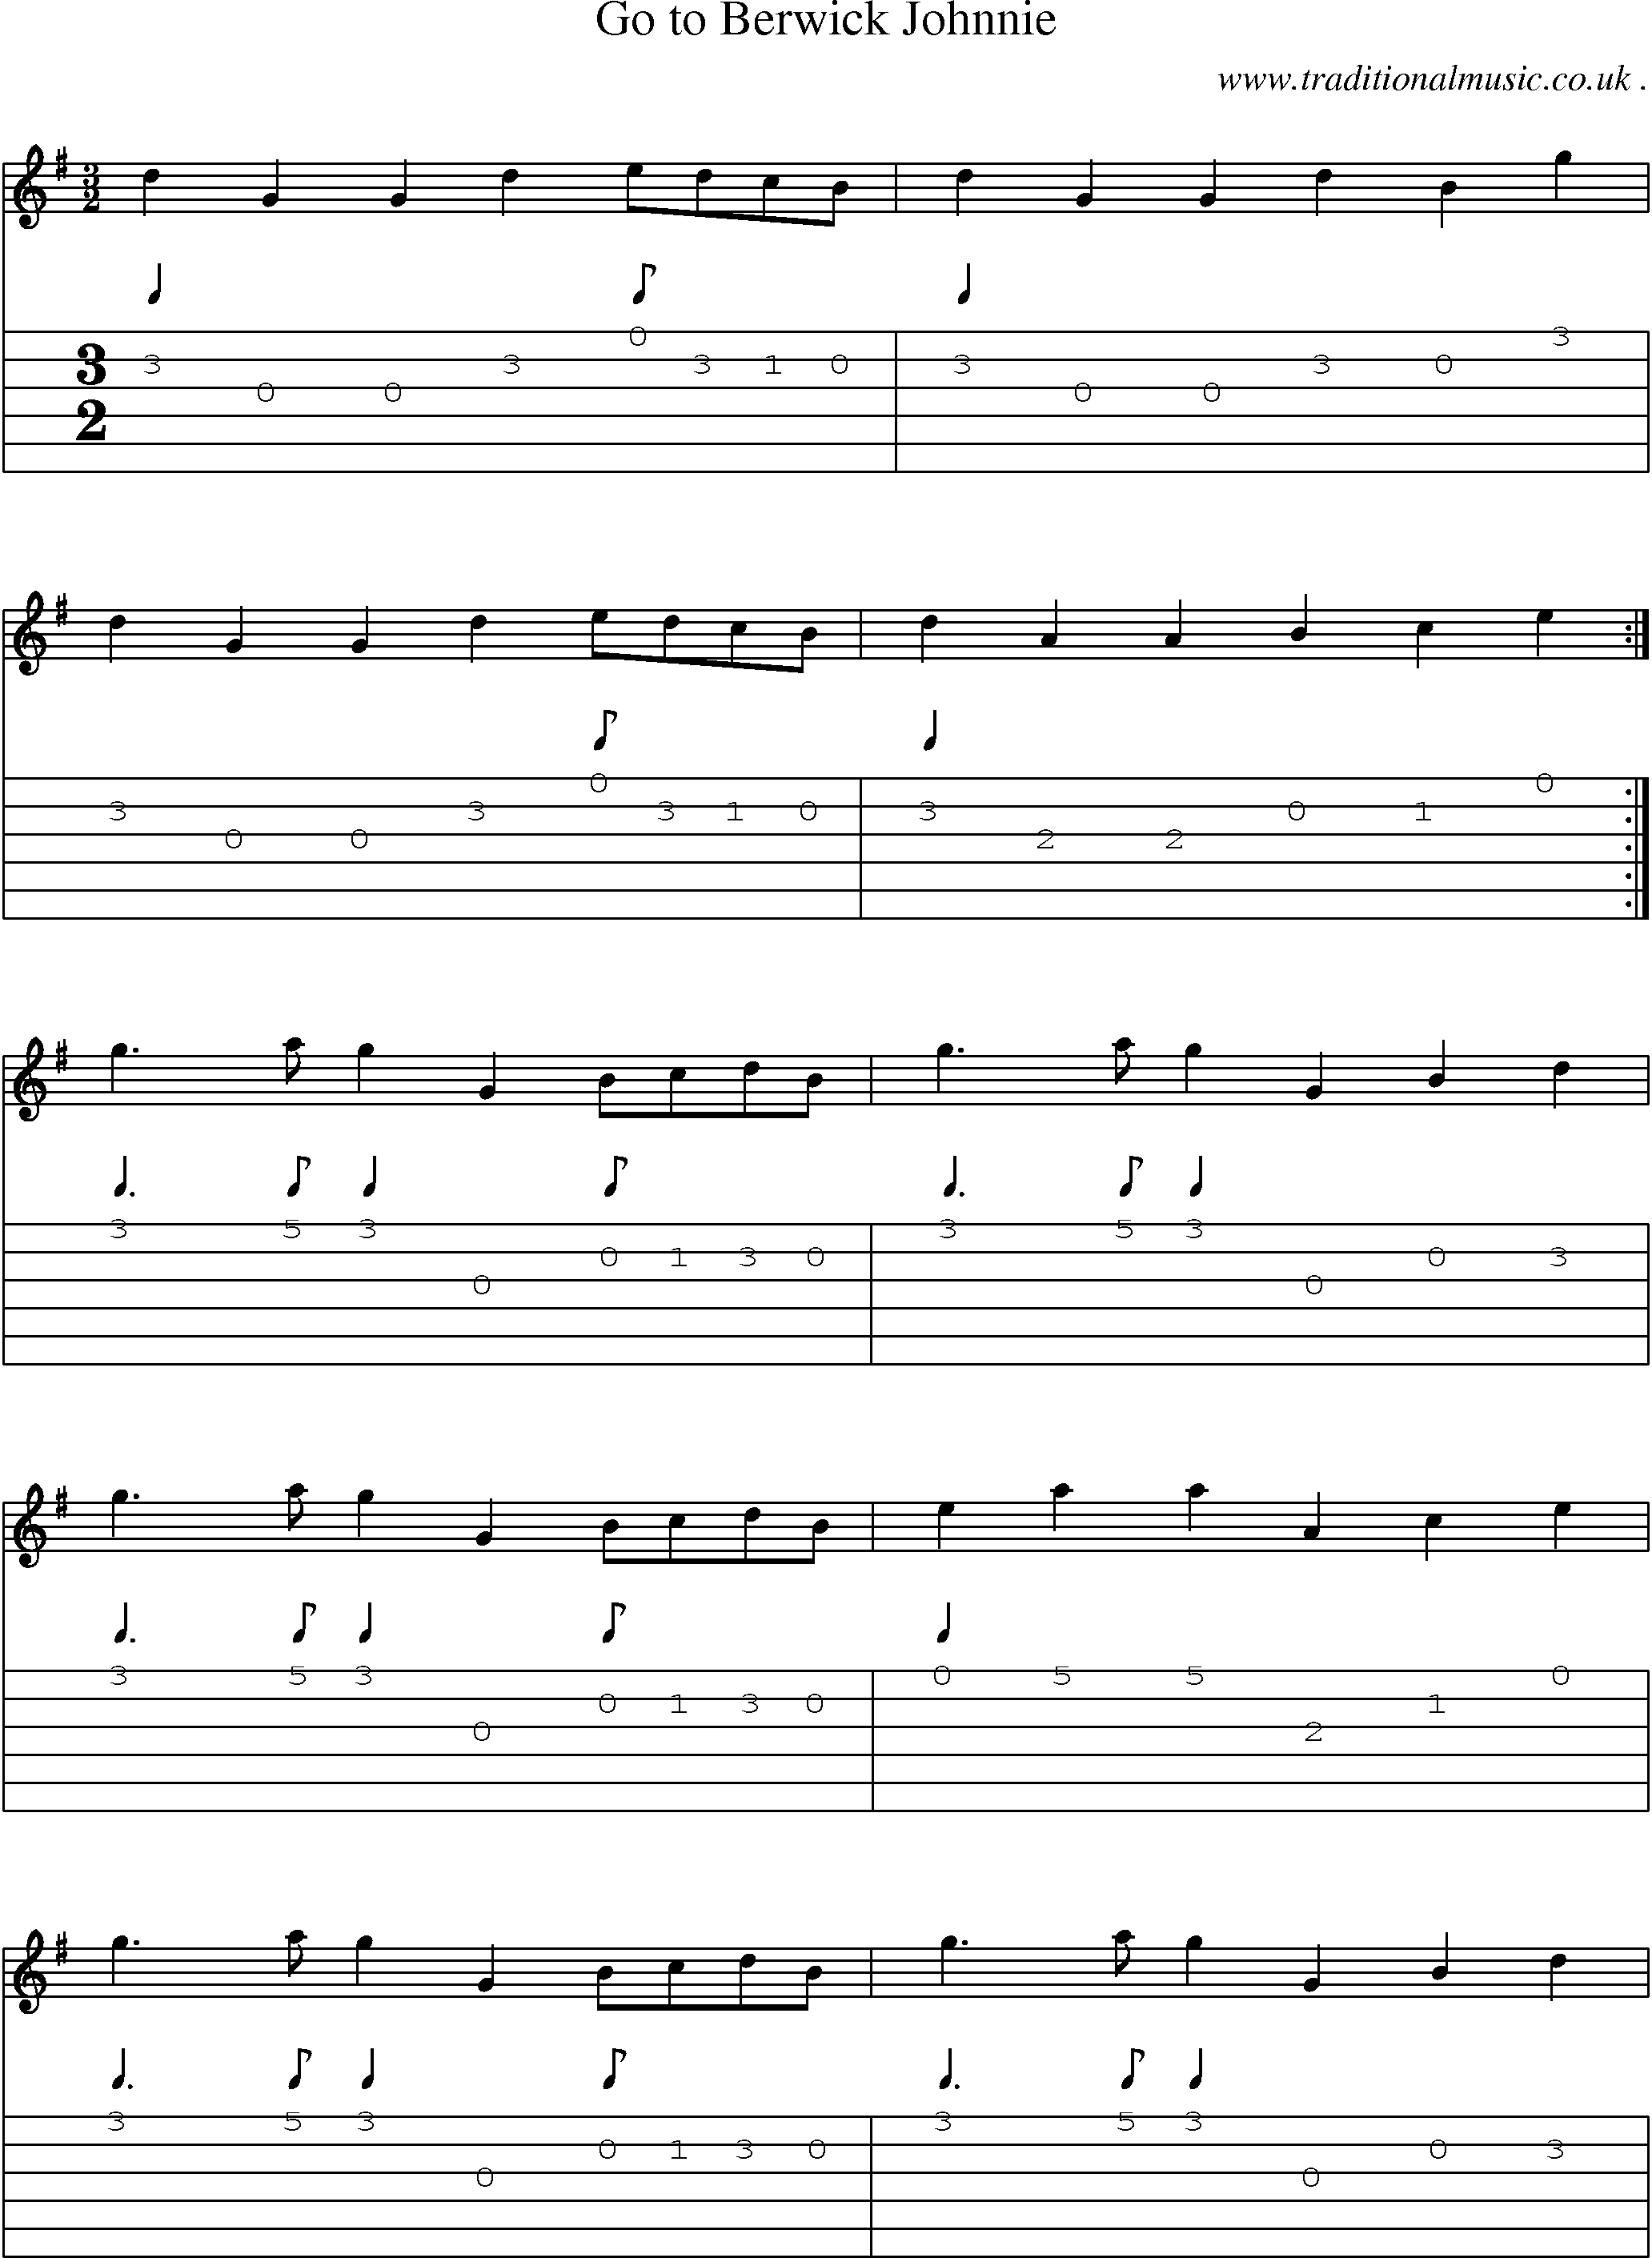 Sheet-Music and Guitar Tabs for Go To Berwick Johnnie